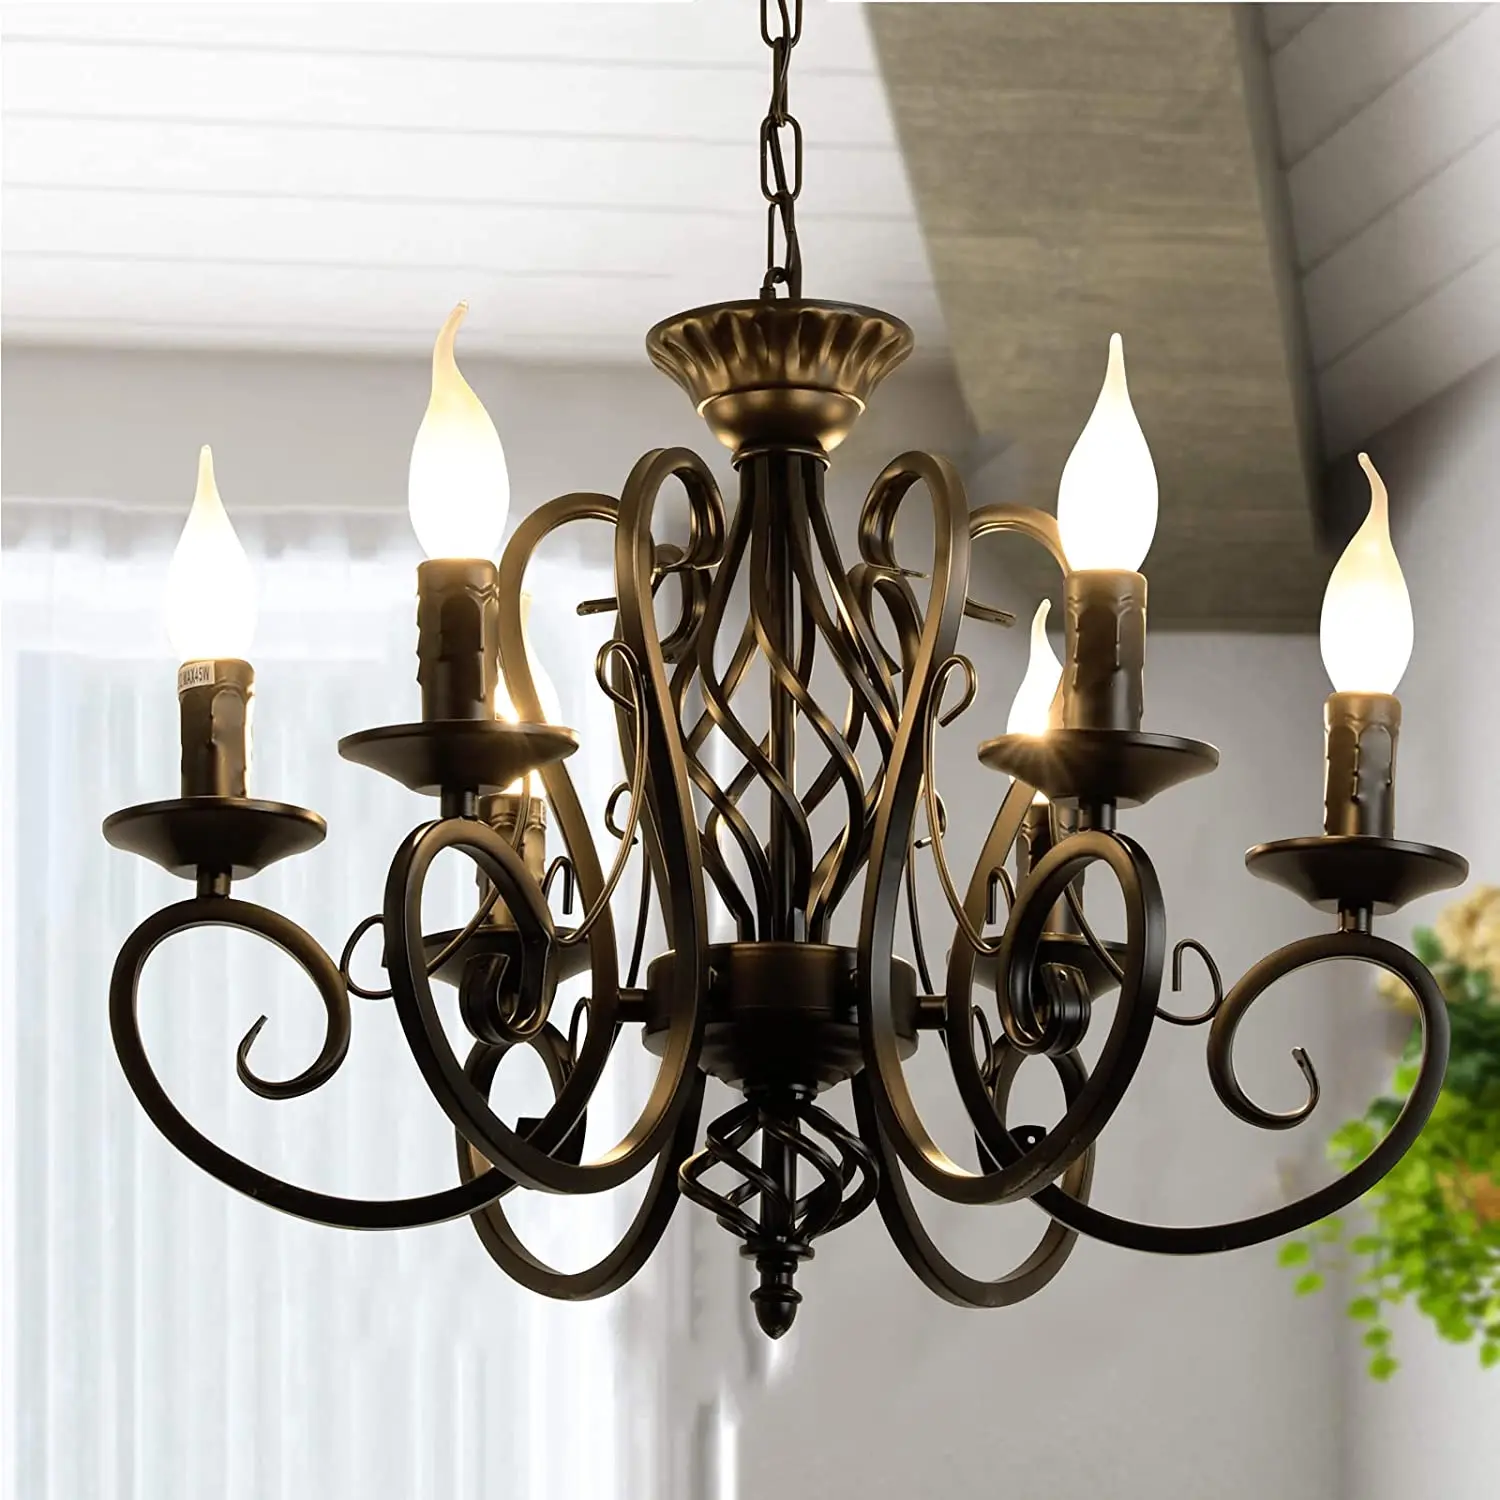 

Black French Country Chandelier,6 Lights Farmhouse Candle Iron Chandeliers,Vintage Metal Pendant Light Fixture Kitchen Island